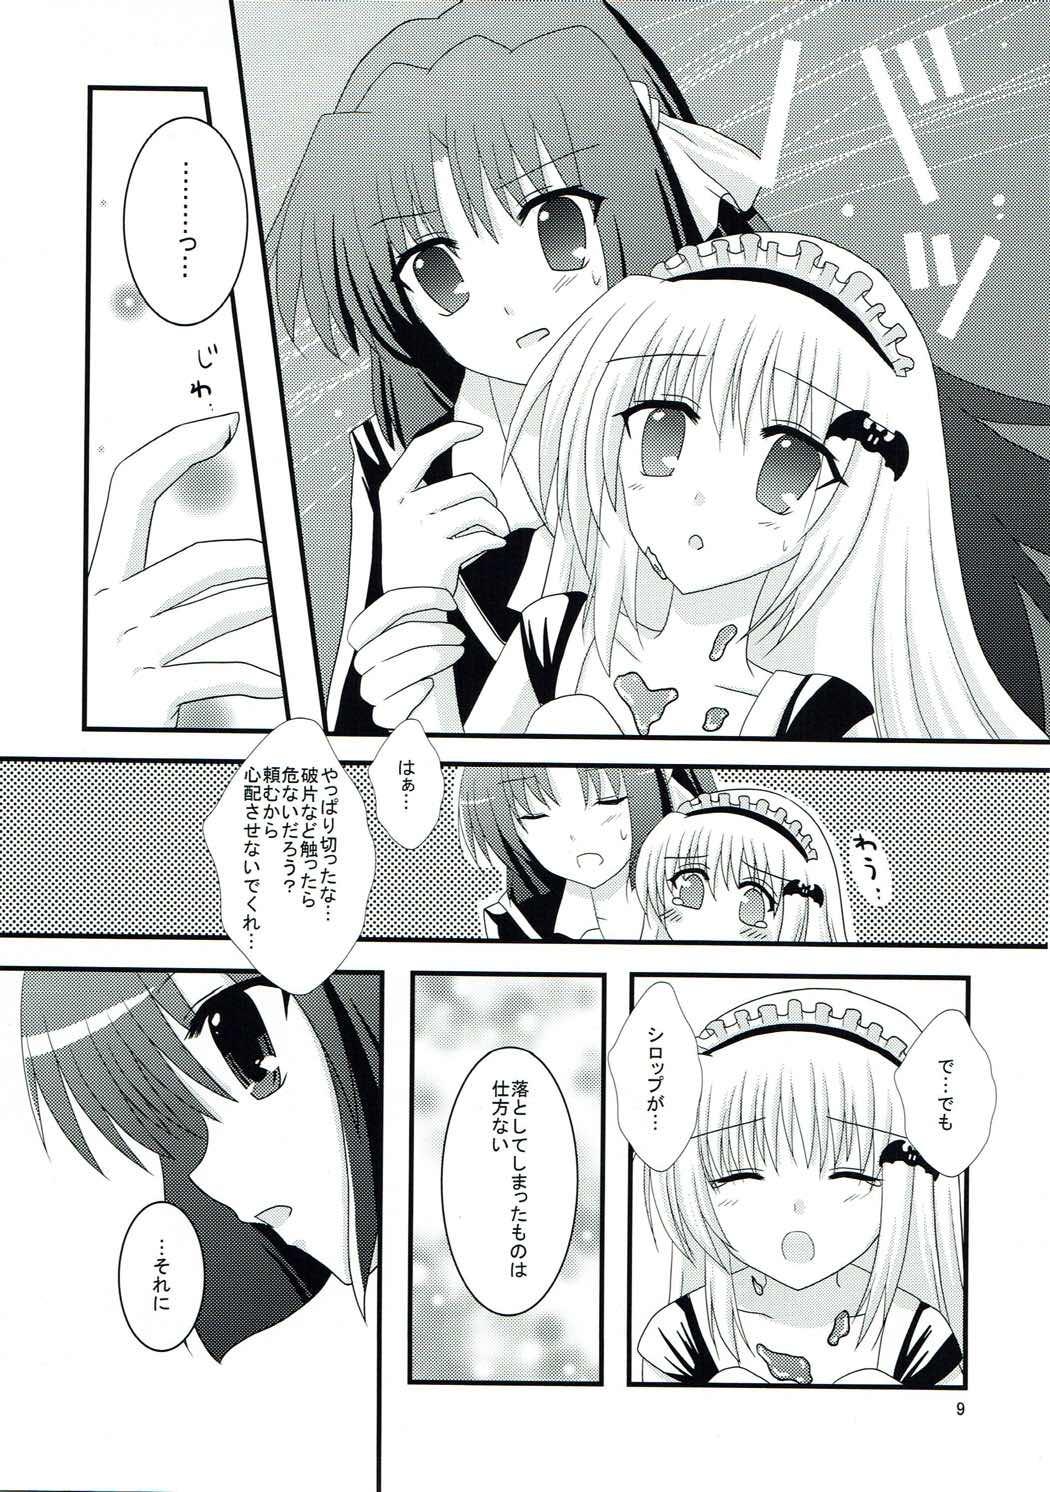 Periscope Maple Syrup - Little busters College - Page 8